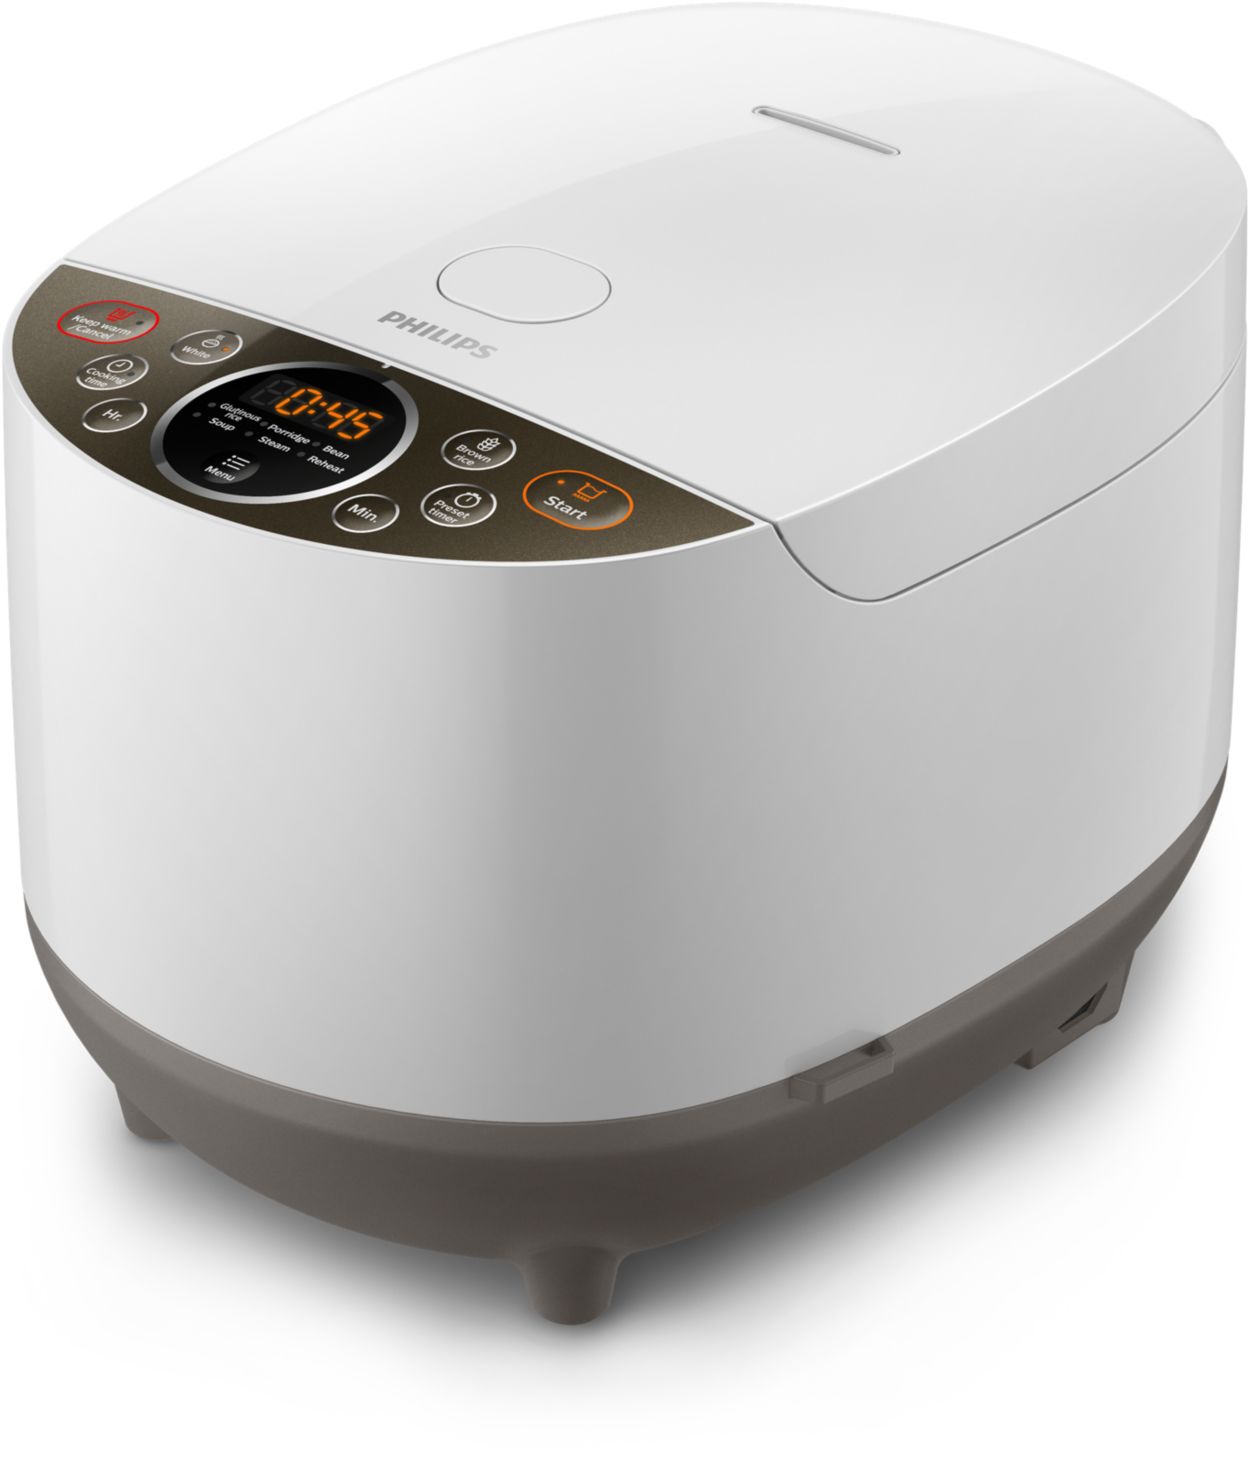 Rice cooker X1 Digital Rice Cooker HD4515/67 | Philips